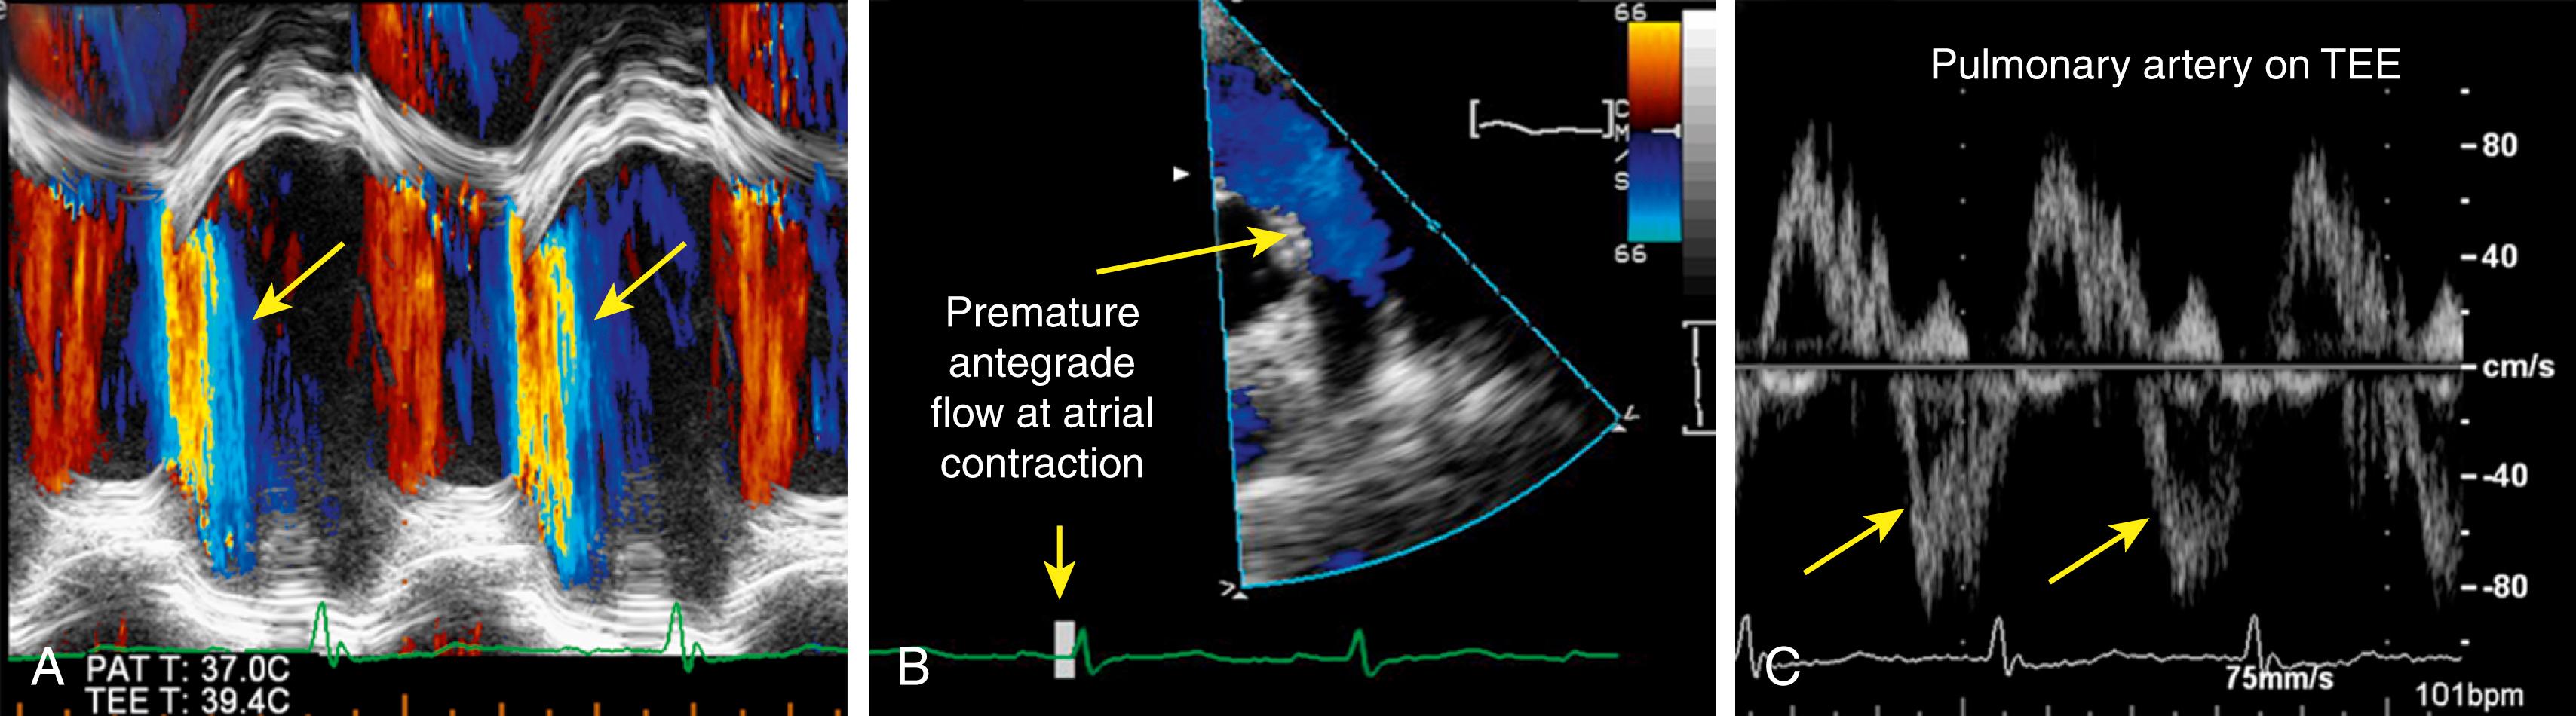 Figure 107.2, Additional markers of severe pulmonic regurgitation (PR). A, Color M-mode echocardiography demonstrates that PR jet terminates abnormally in early diastole (arrows) . This is in contrast to less severe forms of PR in which the PR jet lasts throughout the diastole. B, Color Doppler on a transthoracic short-axis view at the level of the aortic valve demonstrates abnormal antegrade flow across the pulmonic valve at the time of atrial contraction indicative of premature pulmonic valve opening resulting from elevated right ventricular pressures in severe PR. C , Transesophageal echocardiography (TEE) spectral Doppler tracing demonstrates abnormal holodiastolic flow reversal in the pulmonary artery indicative of severe PR.